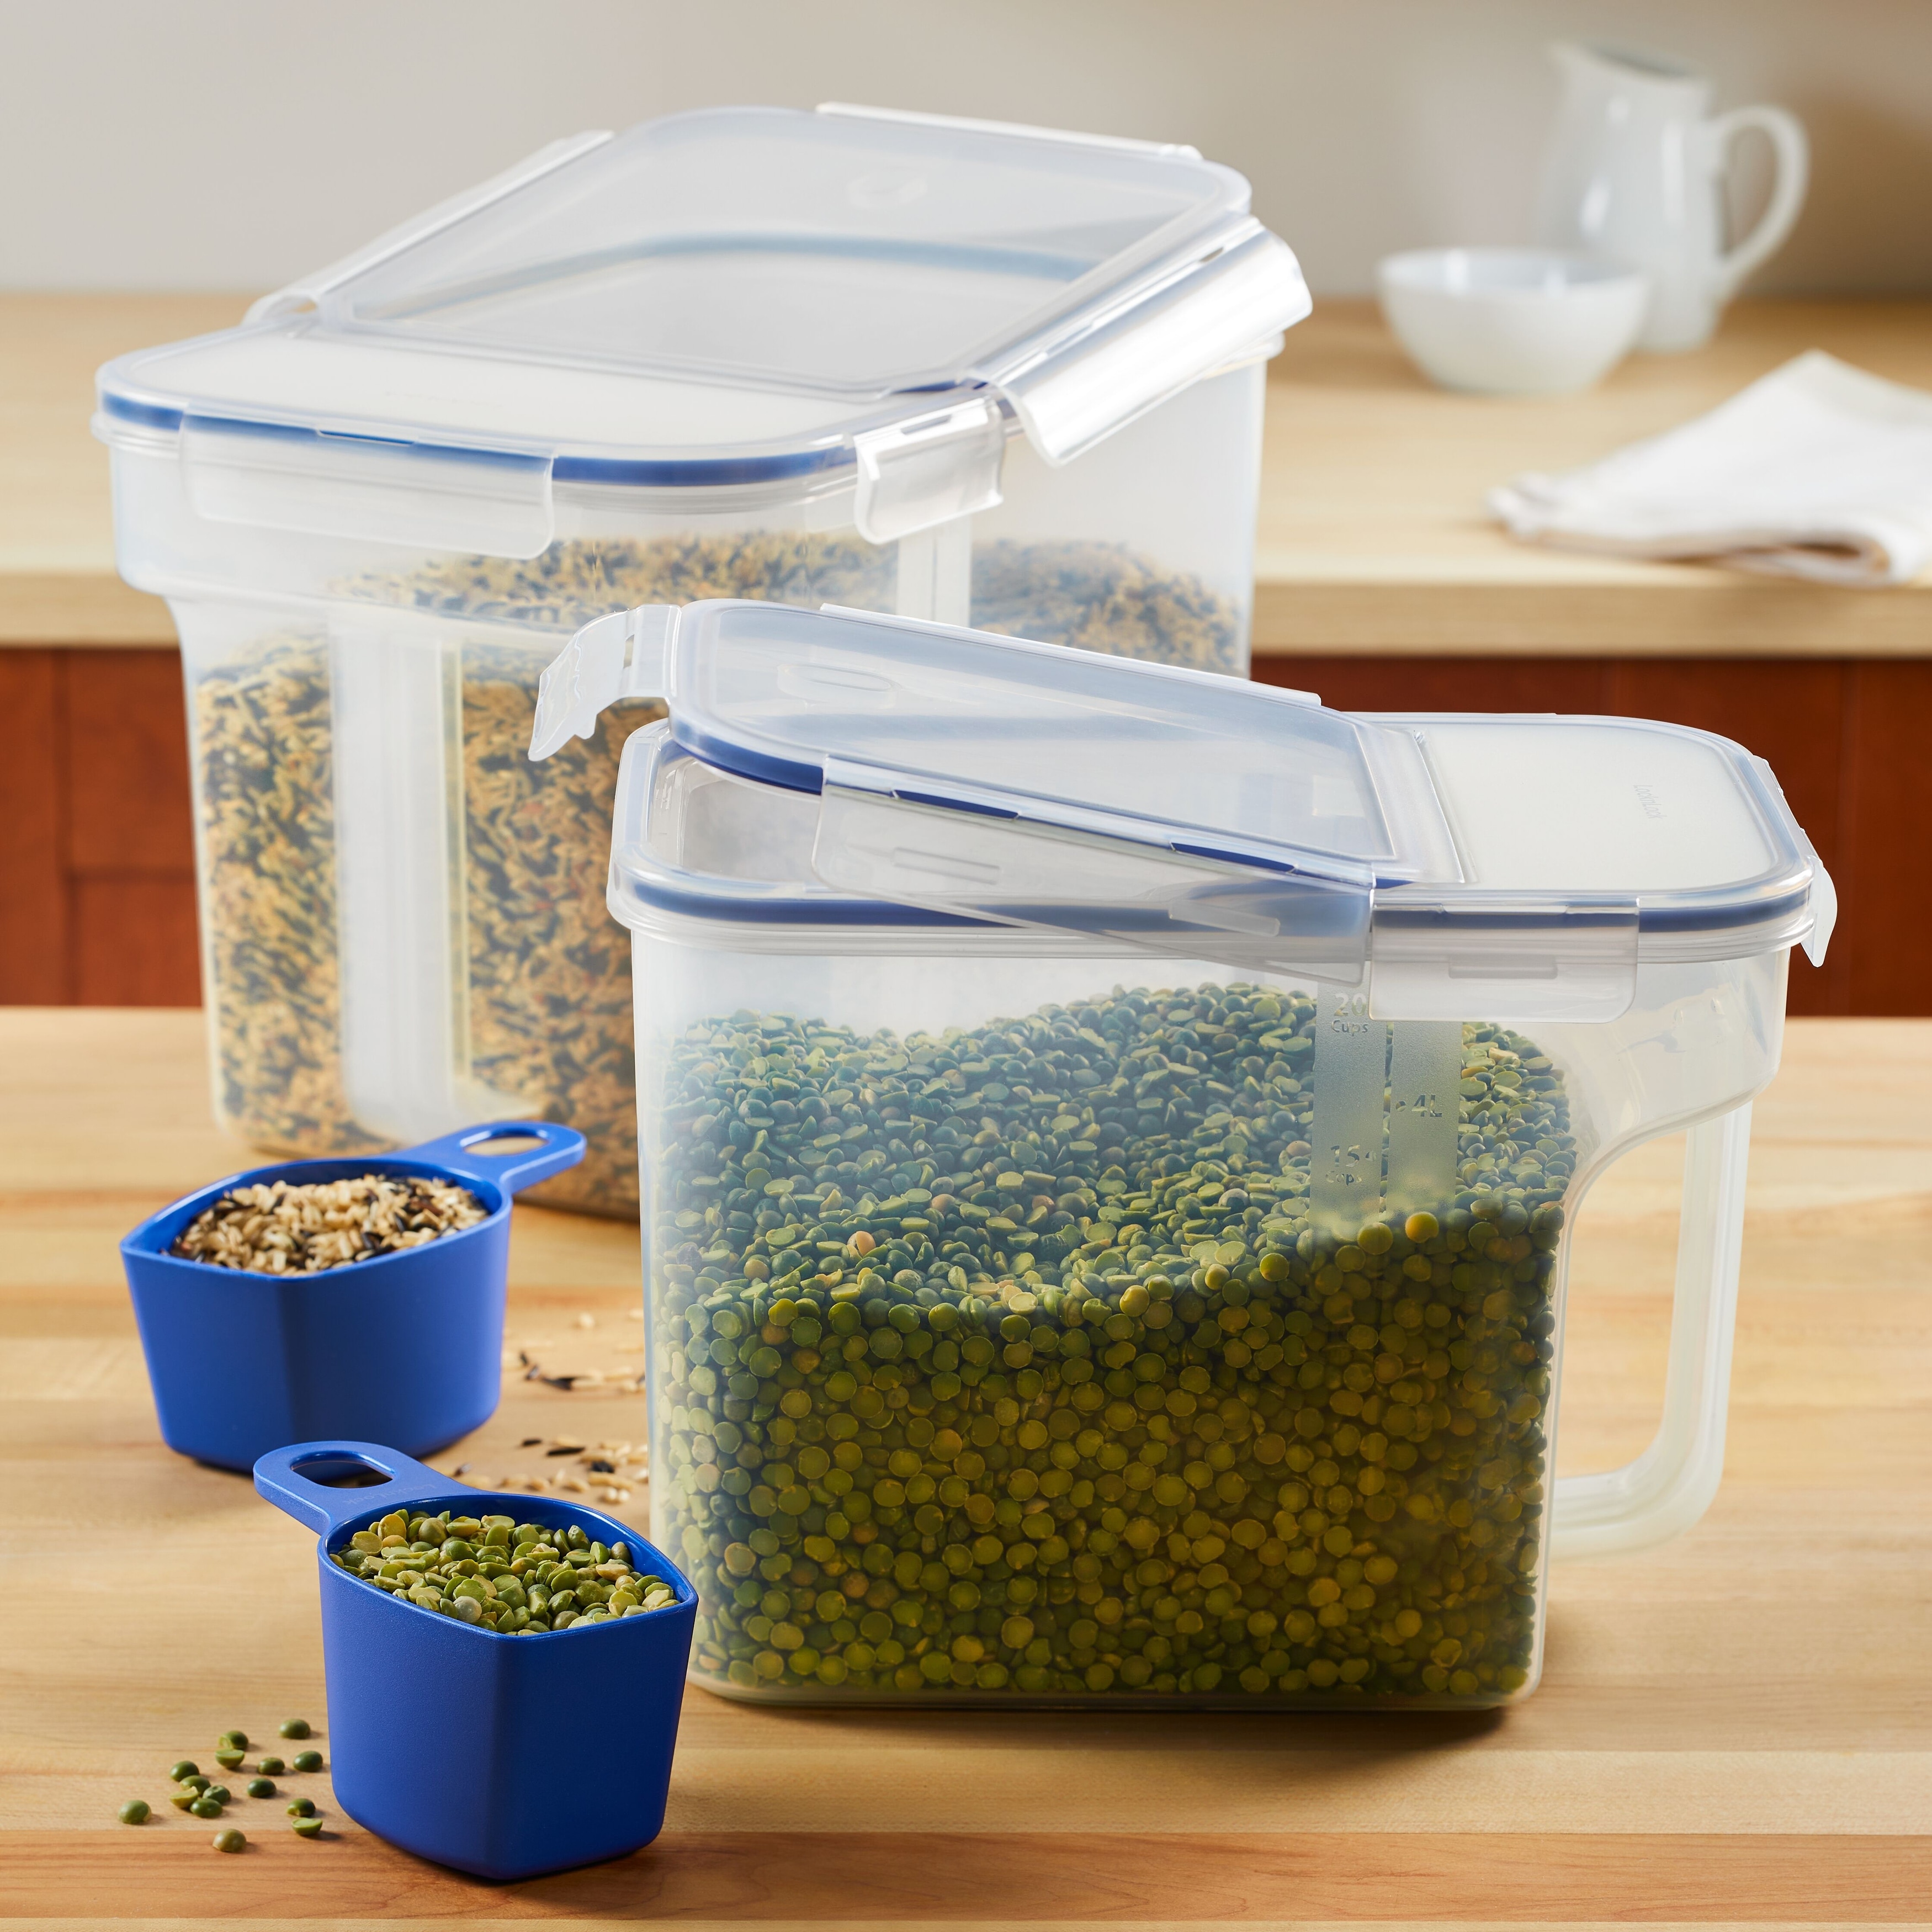 https://ak1.ostkcdn.com/images/products/is/images/direct/060b8ae9887f7a765ace4d1e80f59865f49235a7/LocknLock-Storage-Food-Storage-Container-and-Scoop-Set%2C-4-Piece%2C-Clear.jpg